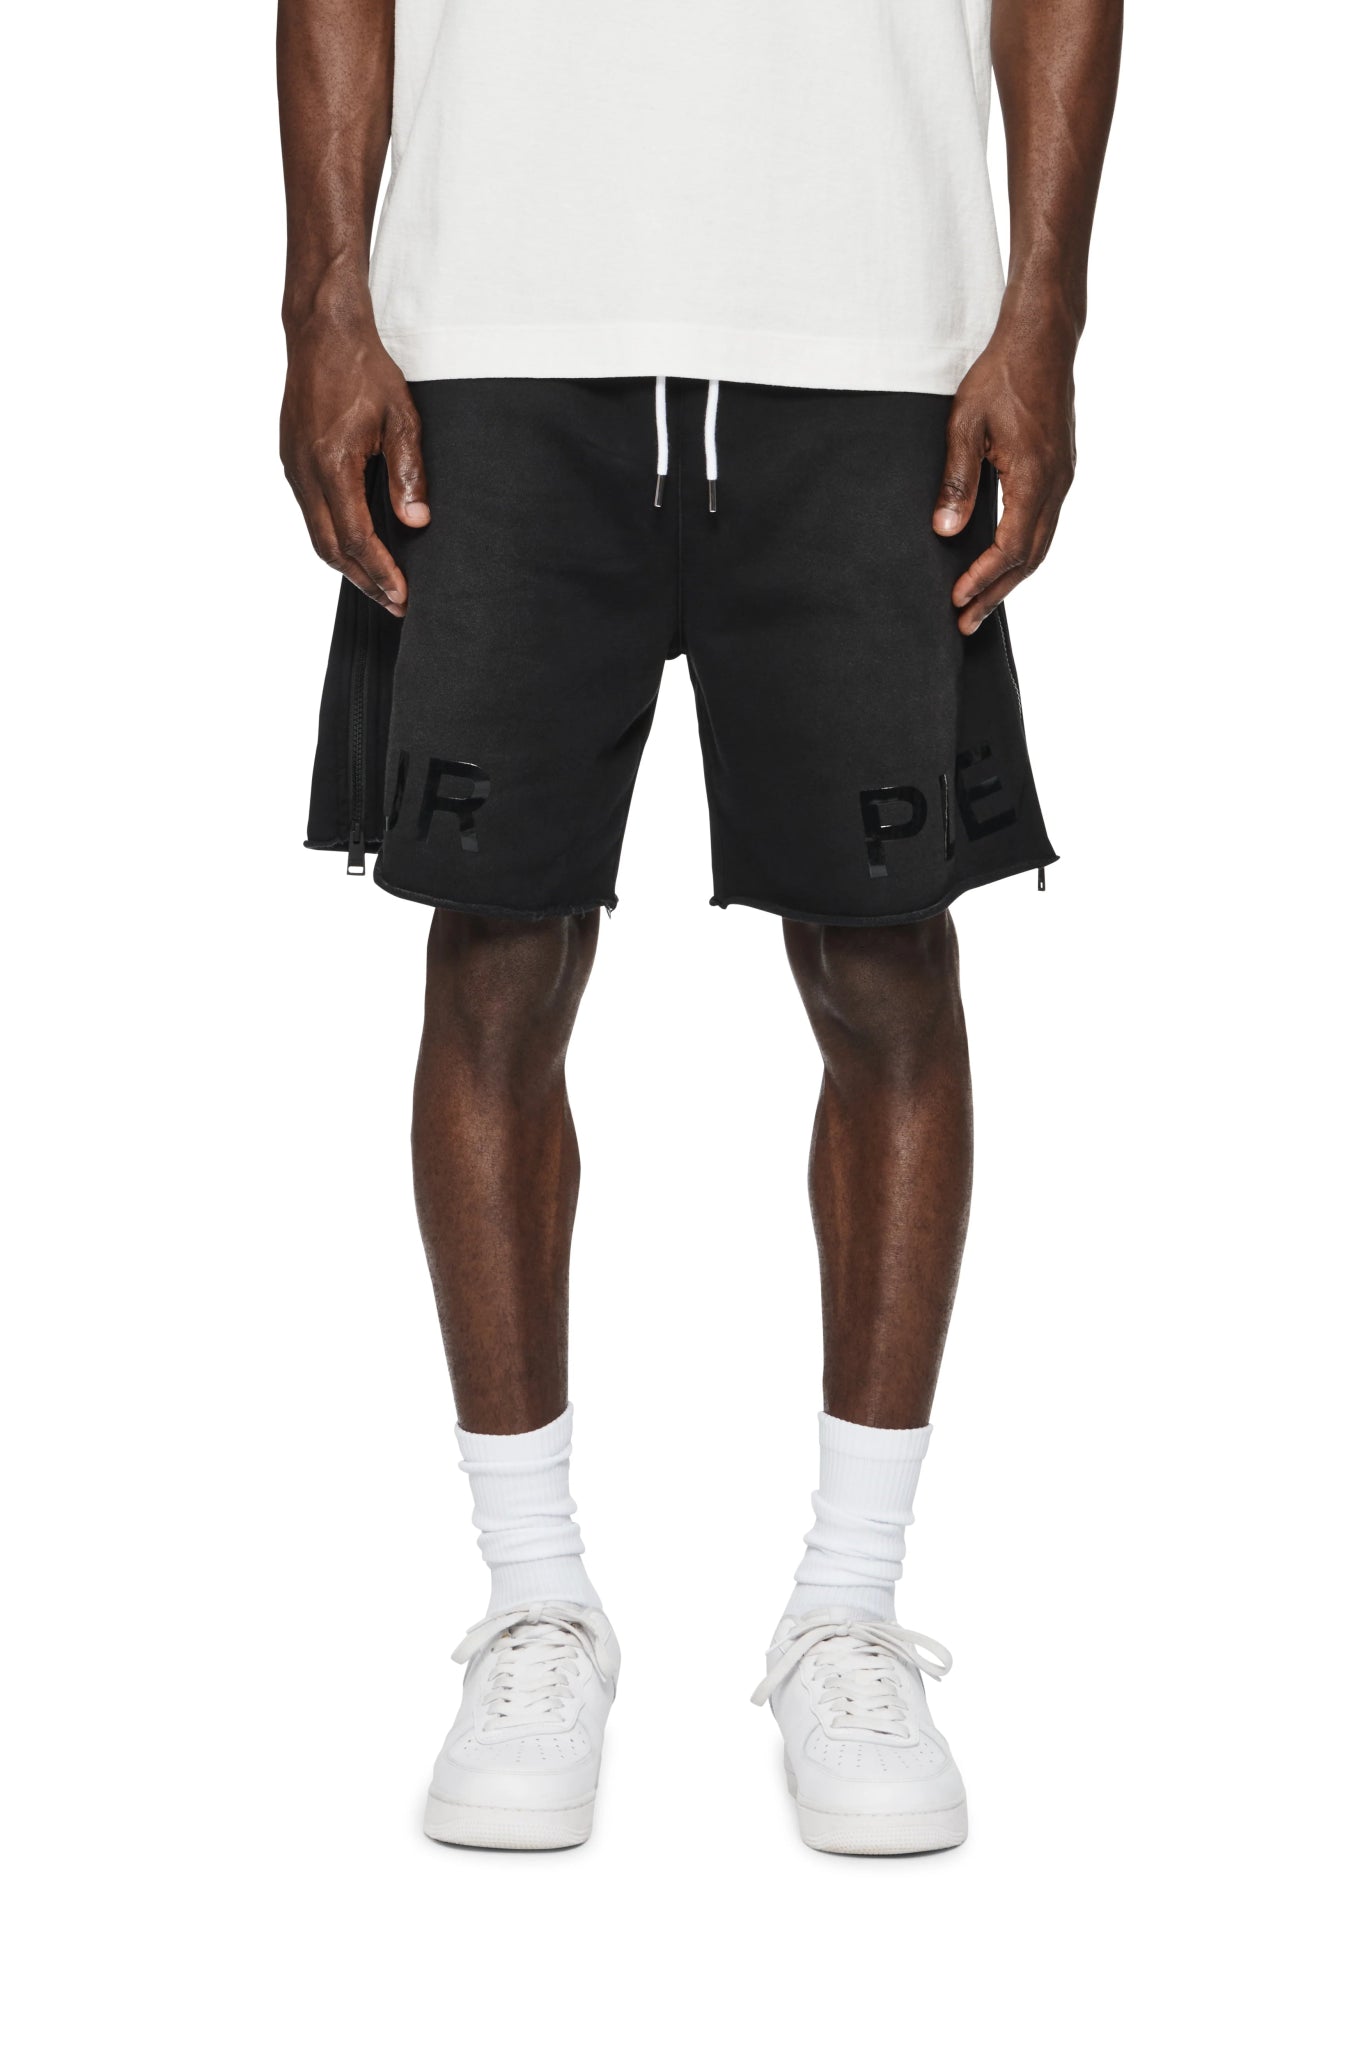 A person wearing a white T-shirt, PURPLE BRAND P479-MFBW MWT FLEECE SWEATSHORT BLACK with the letters "RP" partly visible on the front, white socks, and white sneakers.